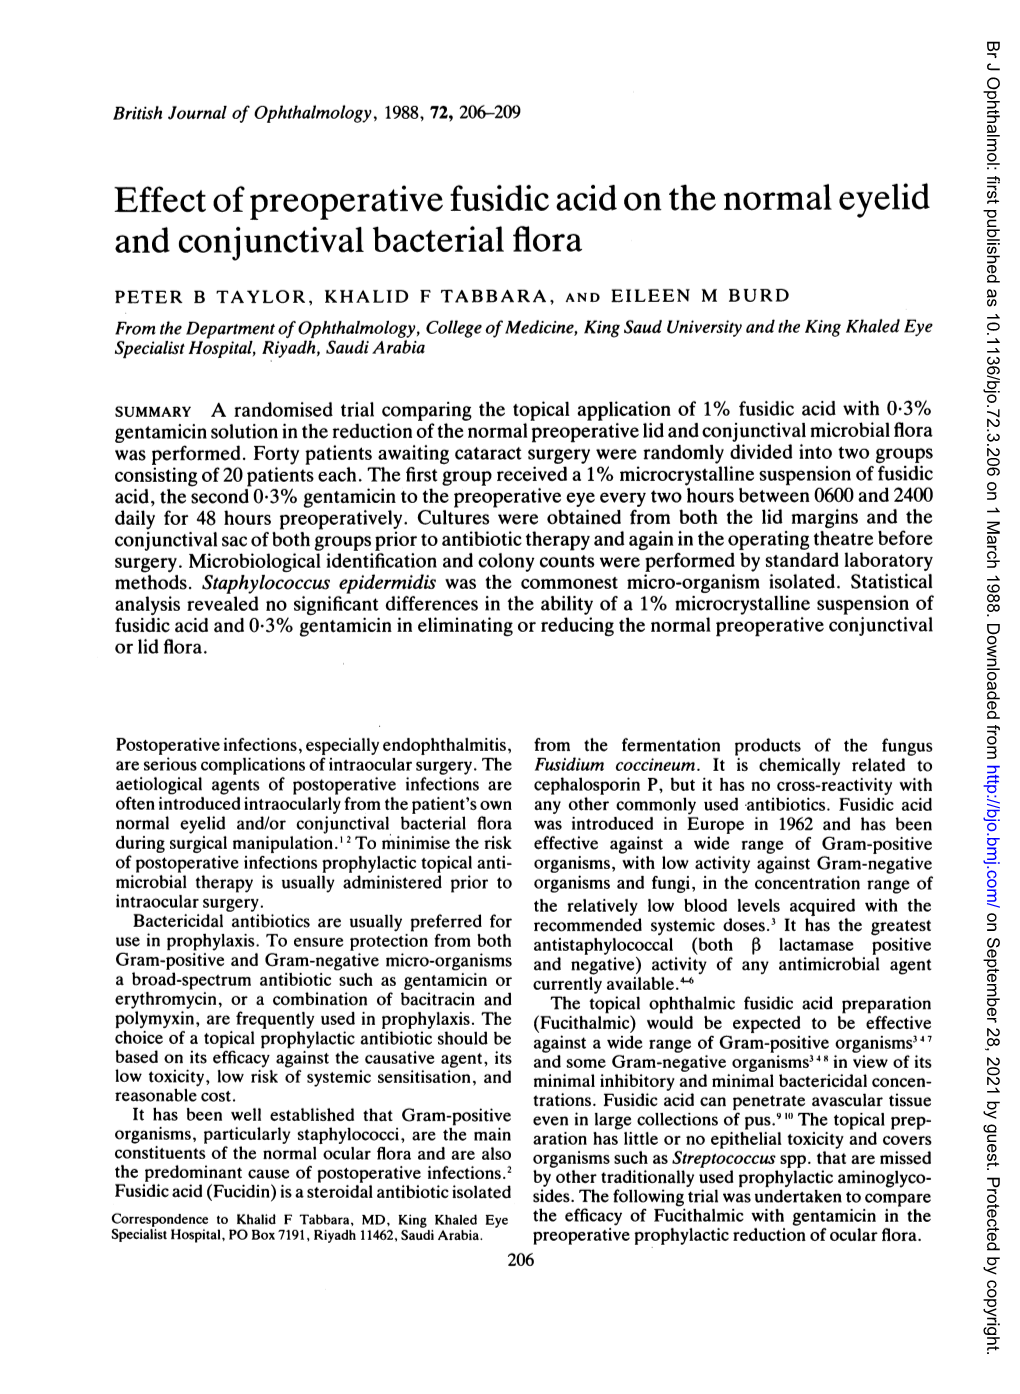 Effect of Preoperative Fusidic Acid on the Normal Eyelid and Conjunctival Bacterial Flora